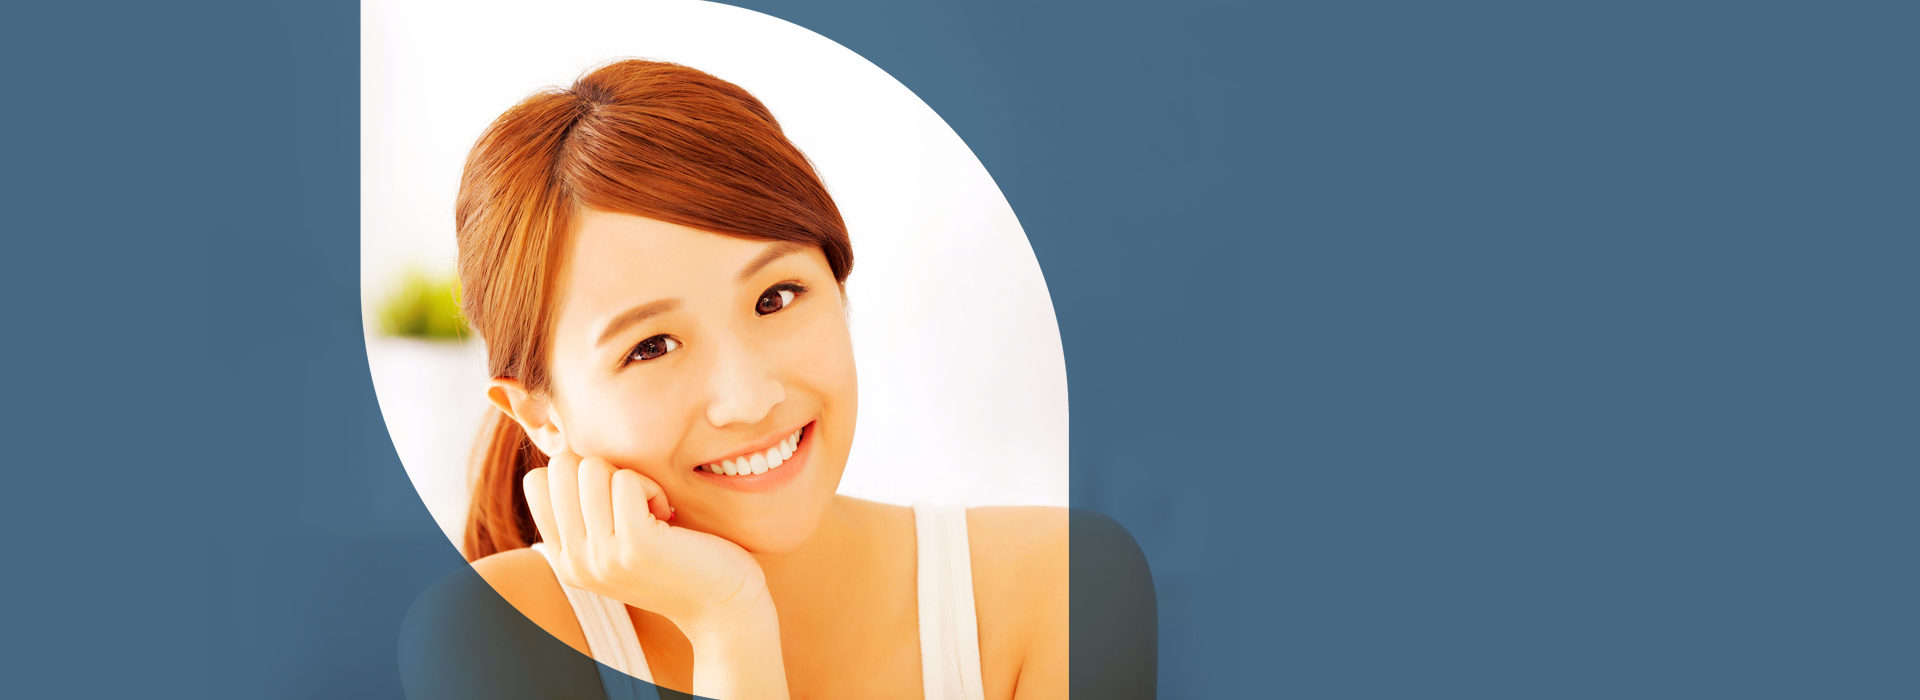 $199 Orthodontic Evaluation - Valued at $700 